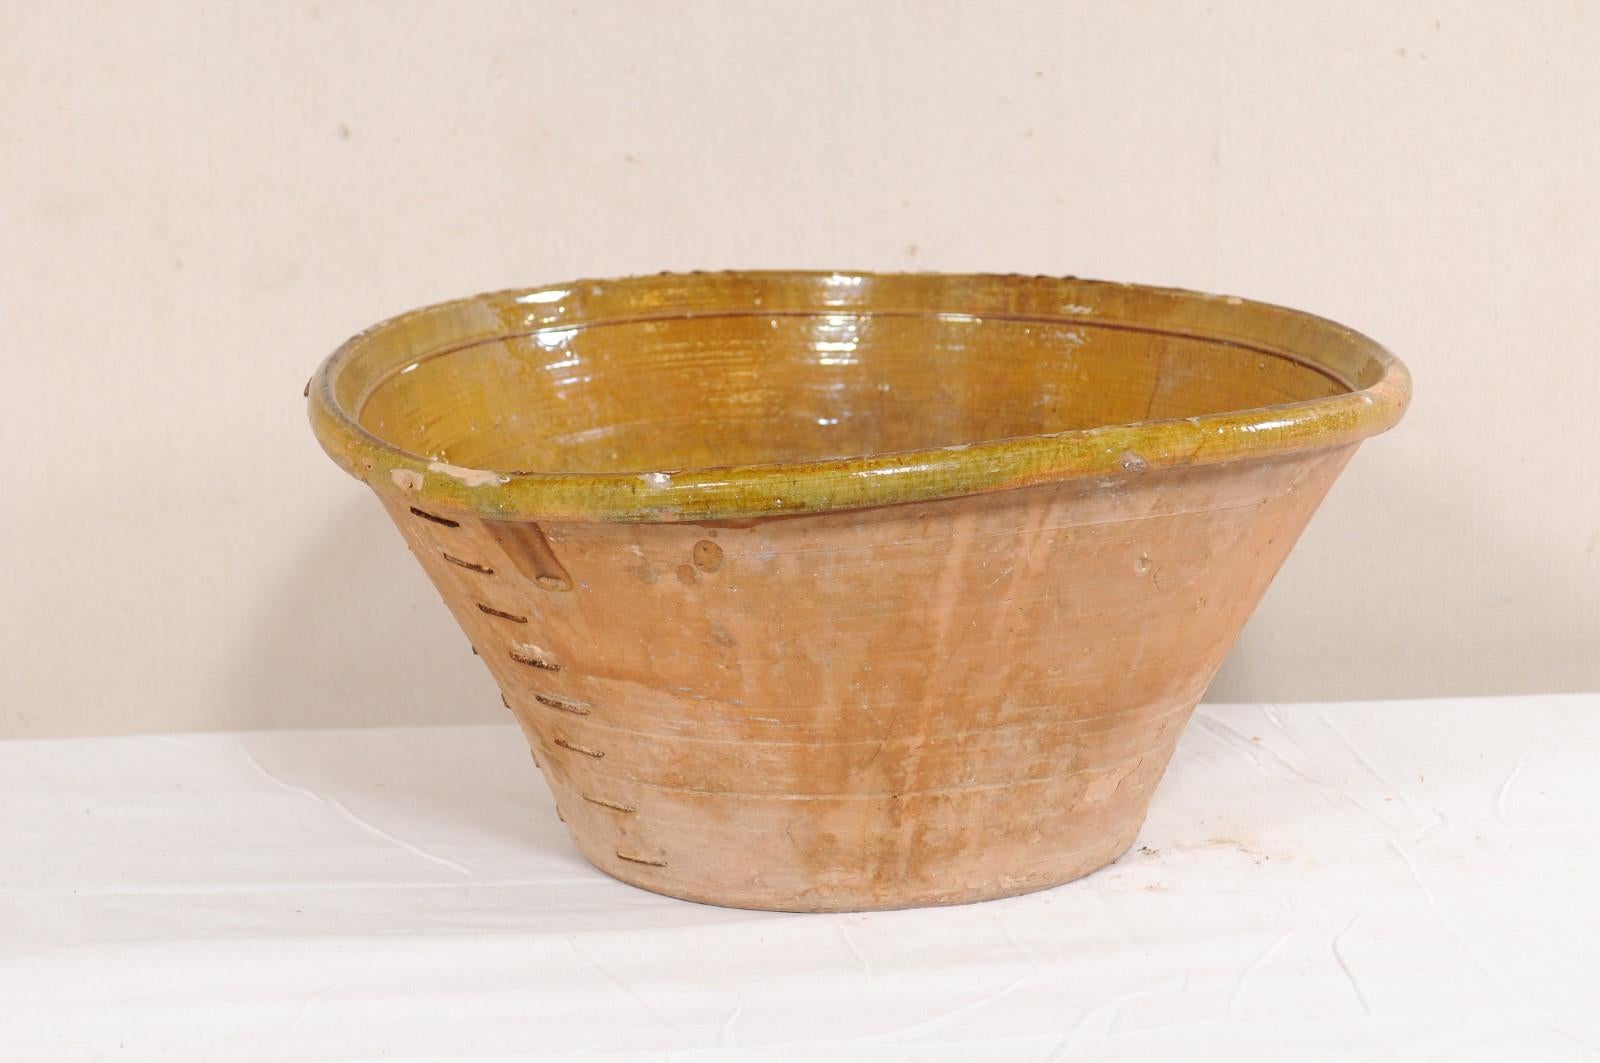 Spanish Terracotta Bowl w/ Muted Yellow & Pale Green Inner Glaze and Old Mending 1